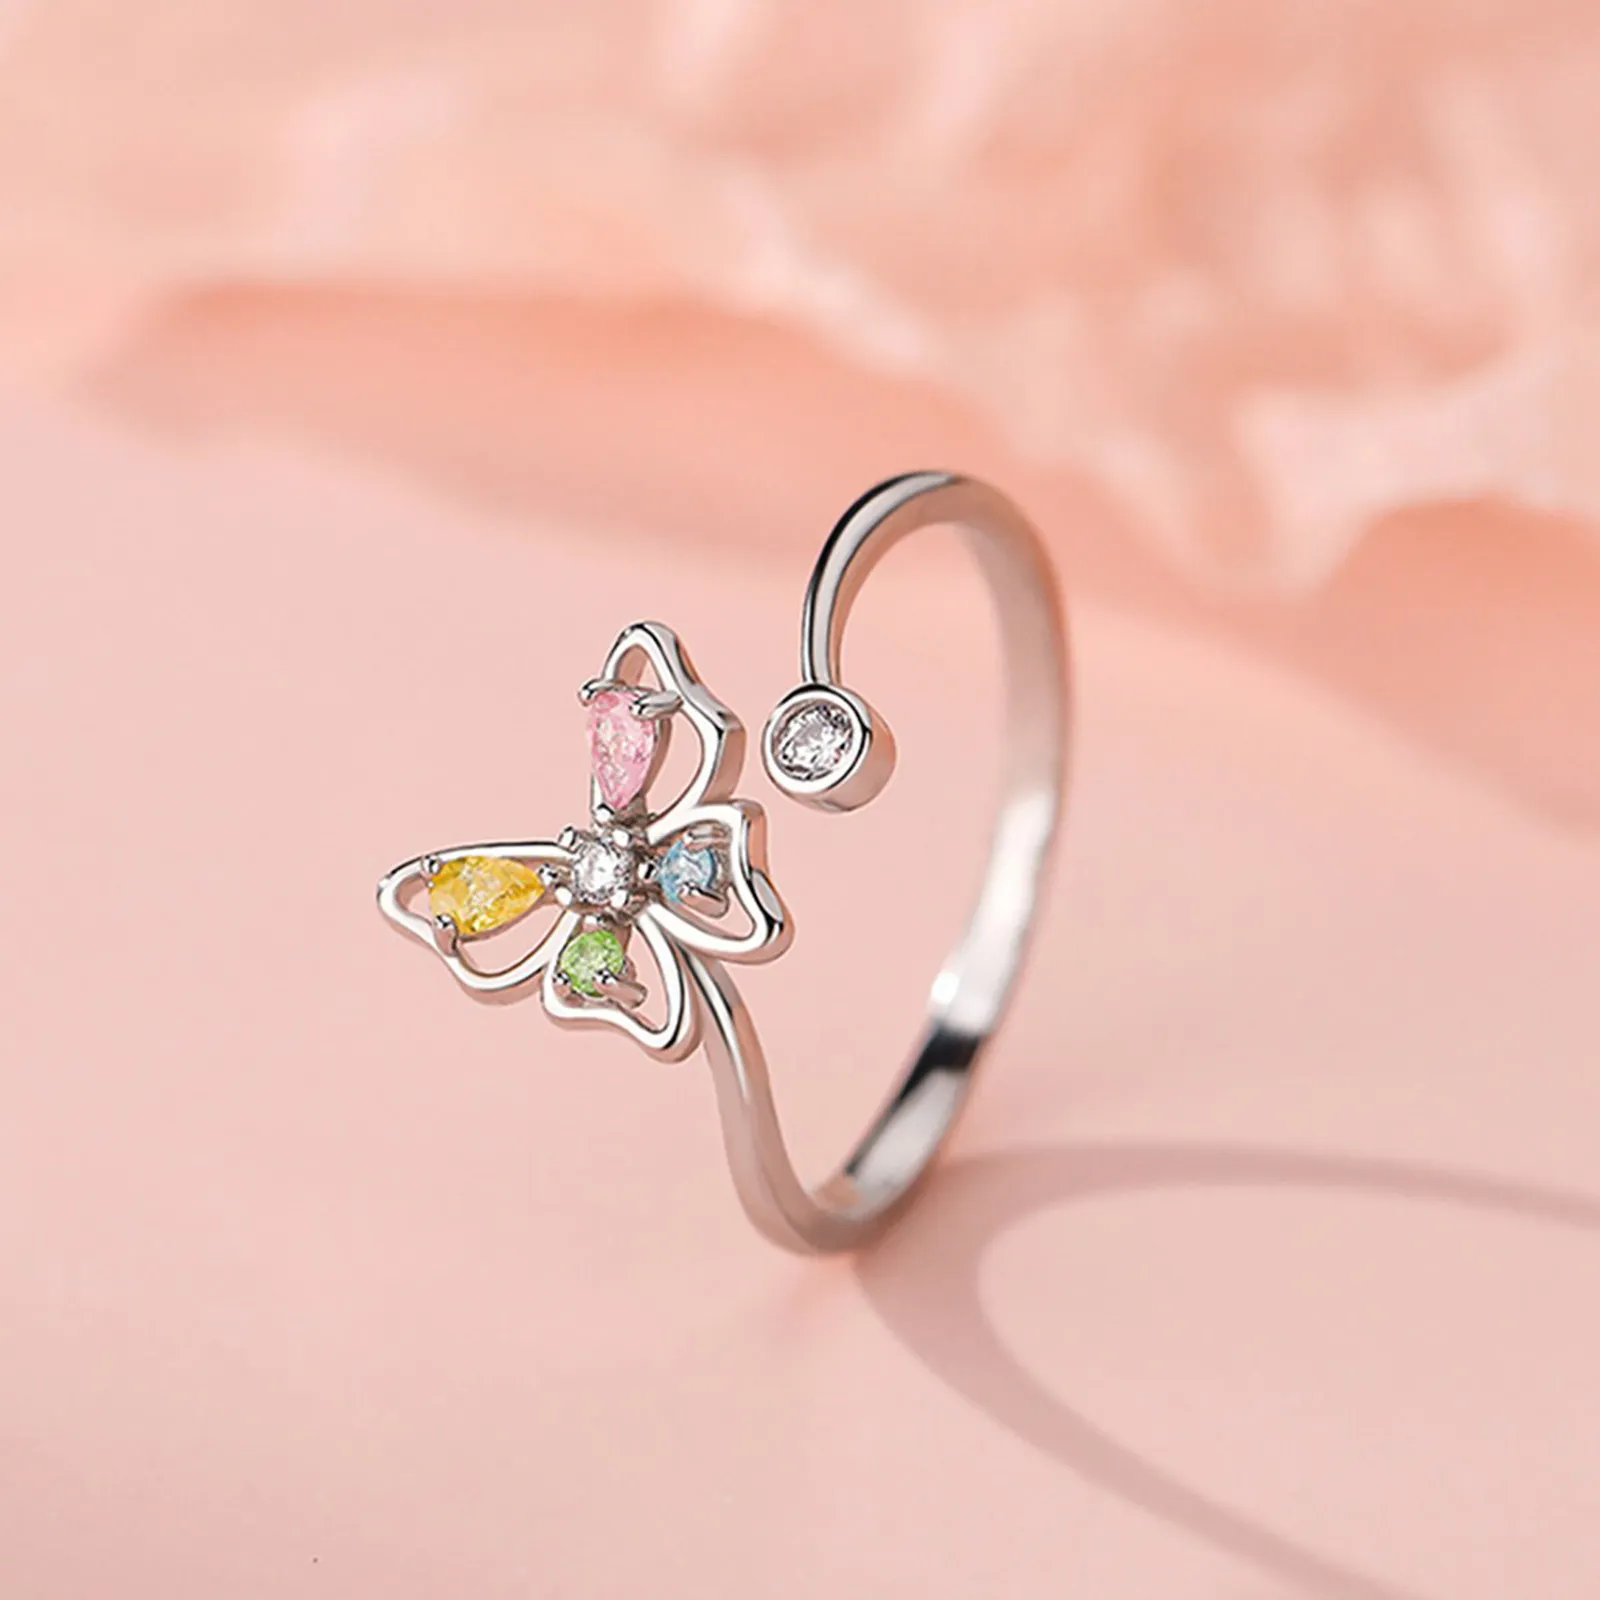 Korean Exquisite Hollow Butterfly Rings For Women Shiny Cubic Zirconia Love Hug Hand Finger Ring Girls Minimalist Dainty Jewlery